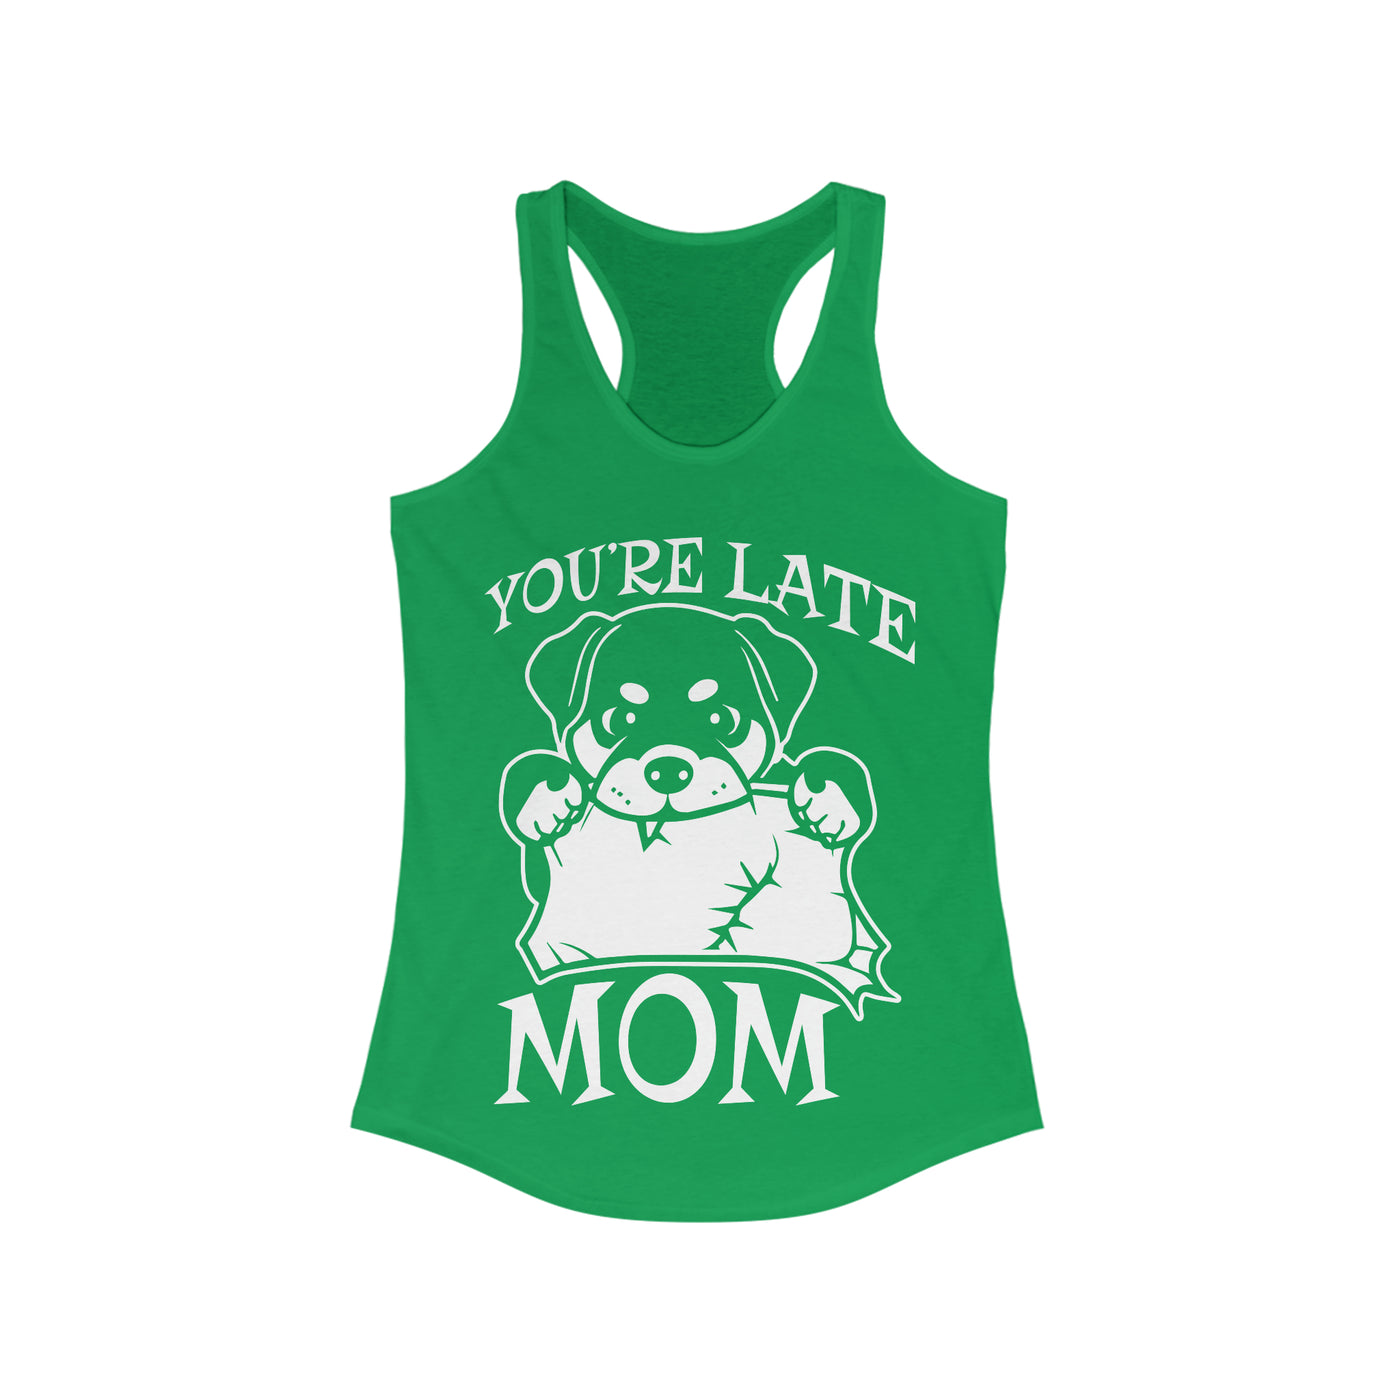 You're Late Mom Tank Top